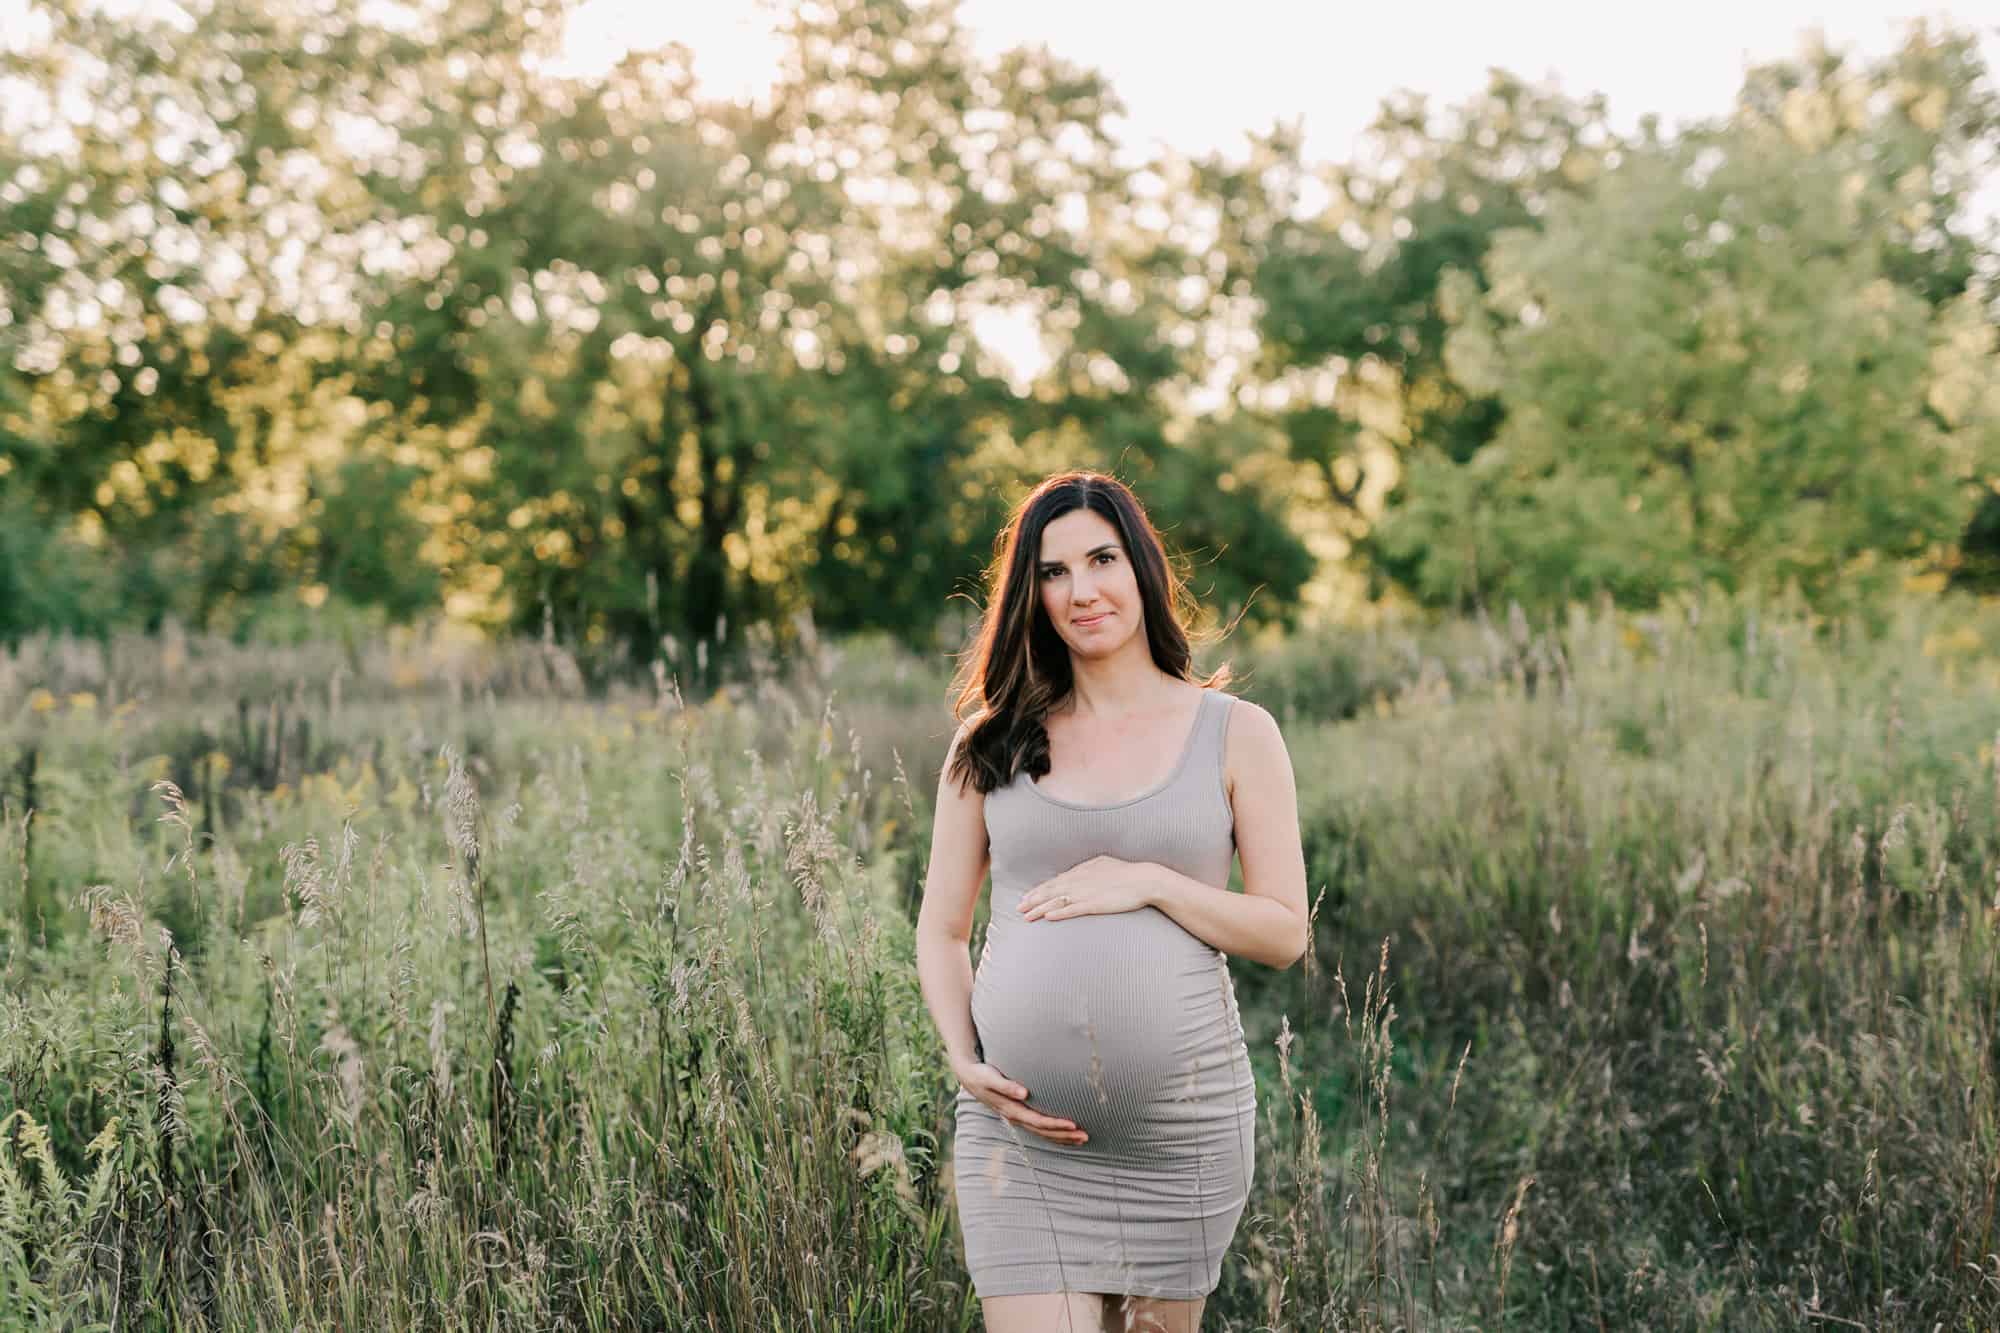 Owner of Skin Care Beauty Co., in Guelph ontario stands in a field during her maternity session